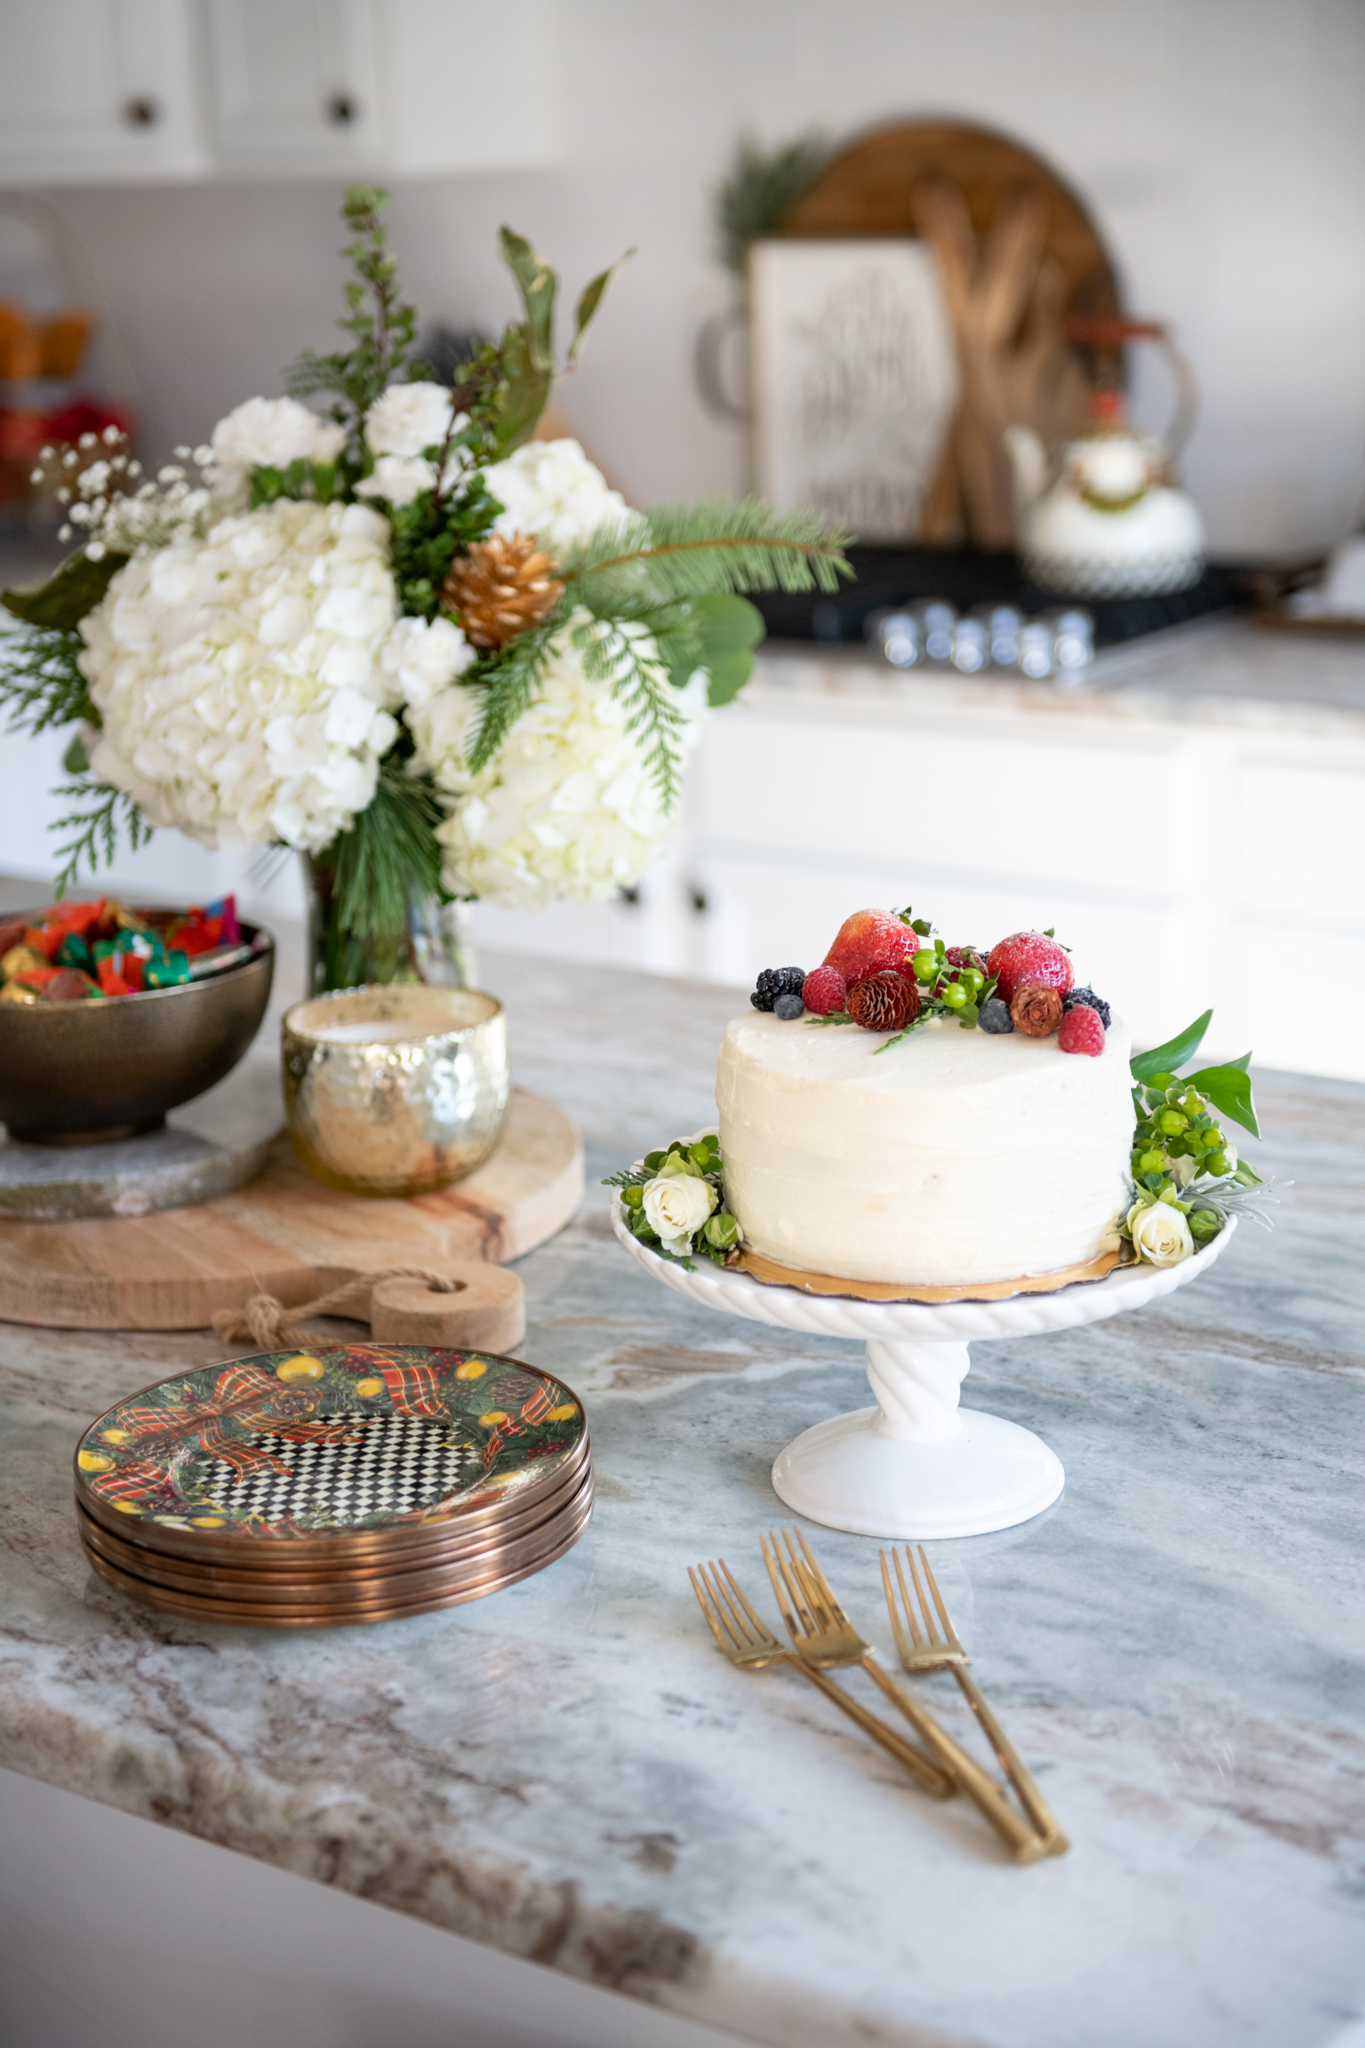 Christmas Home Decor Ideas by popular Ohio life and style blog, Coffee Beans and Bobby Pins: image of a kitchen island that's set with a winter floral arrangement, cake with a winter cake topper, Christmas plates, gold forks, and a gold candle. 